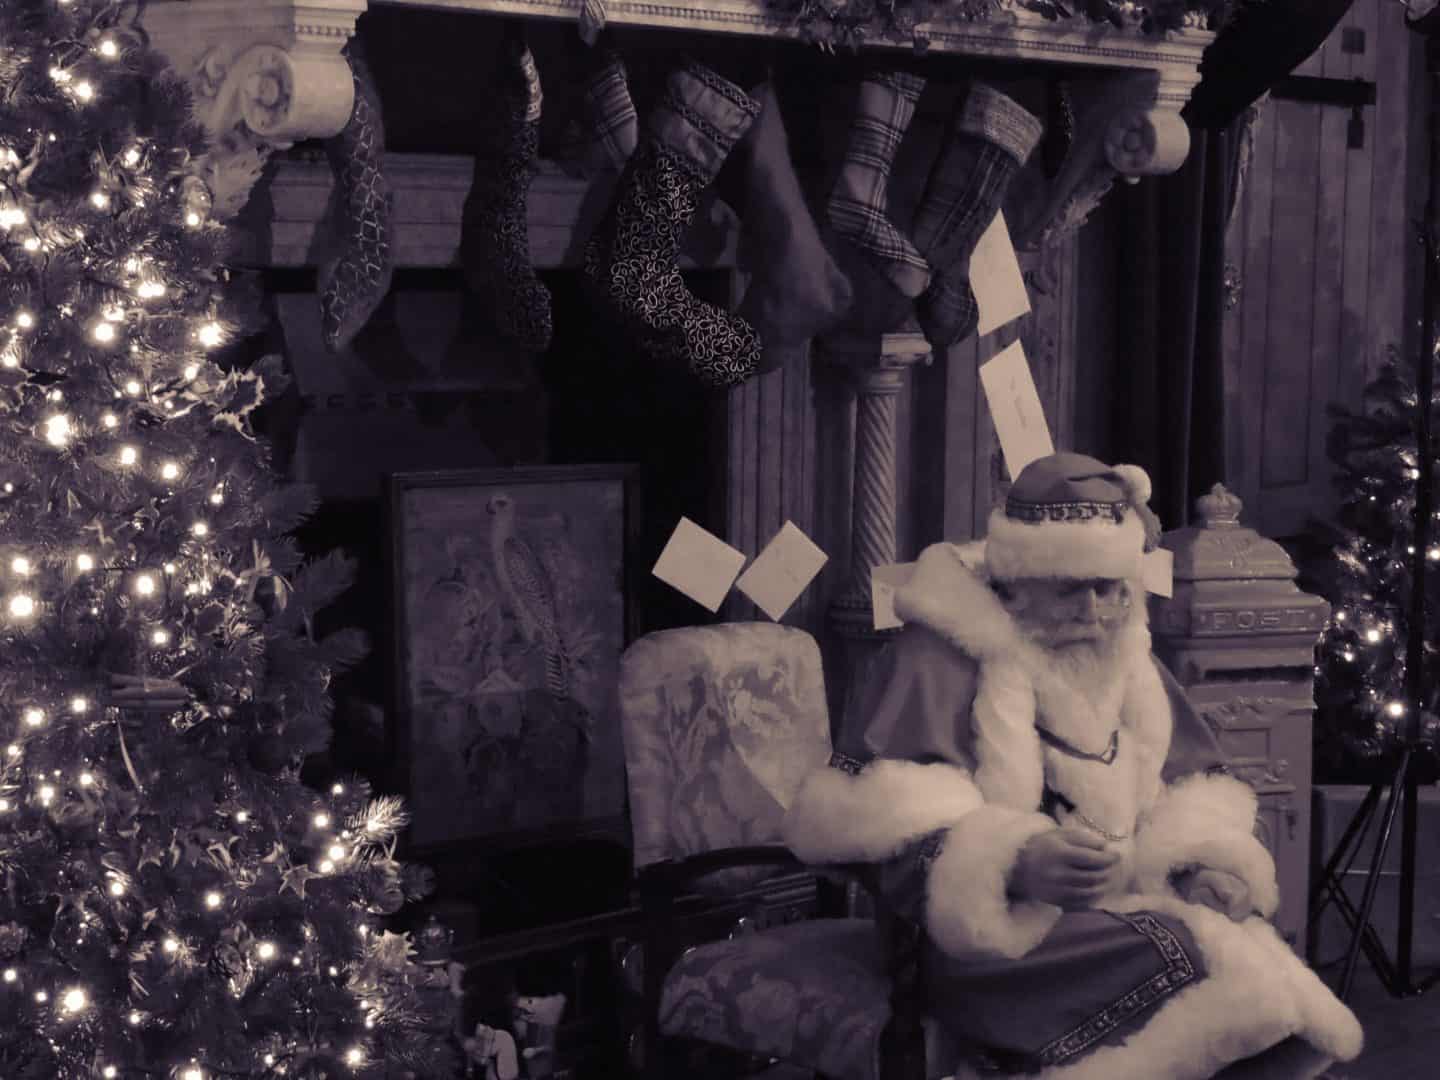 Santa sitting in front of a large fire place by a Christmas tree. Image is in black and white